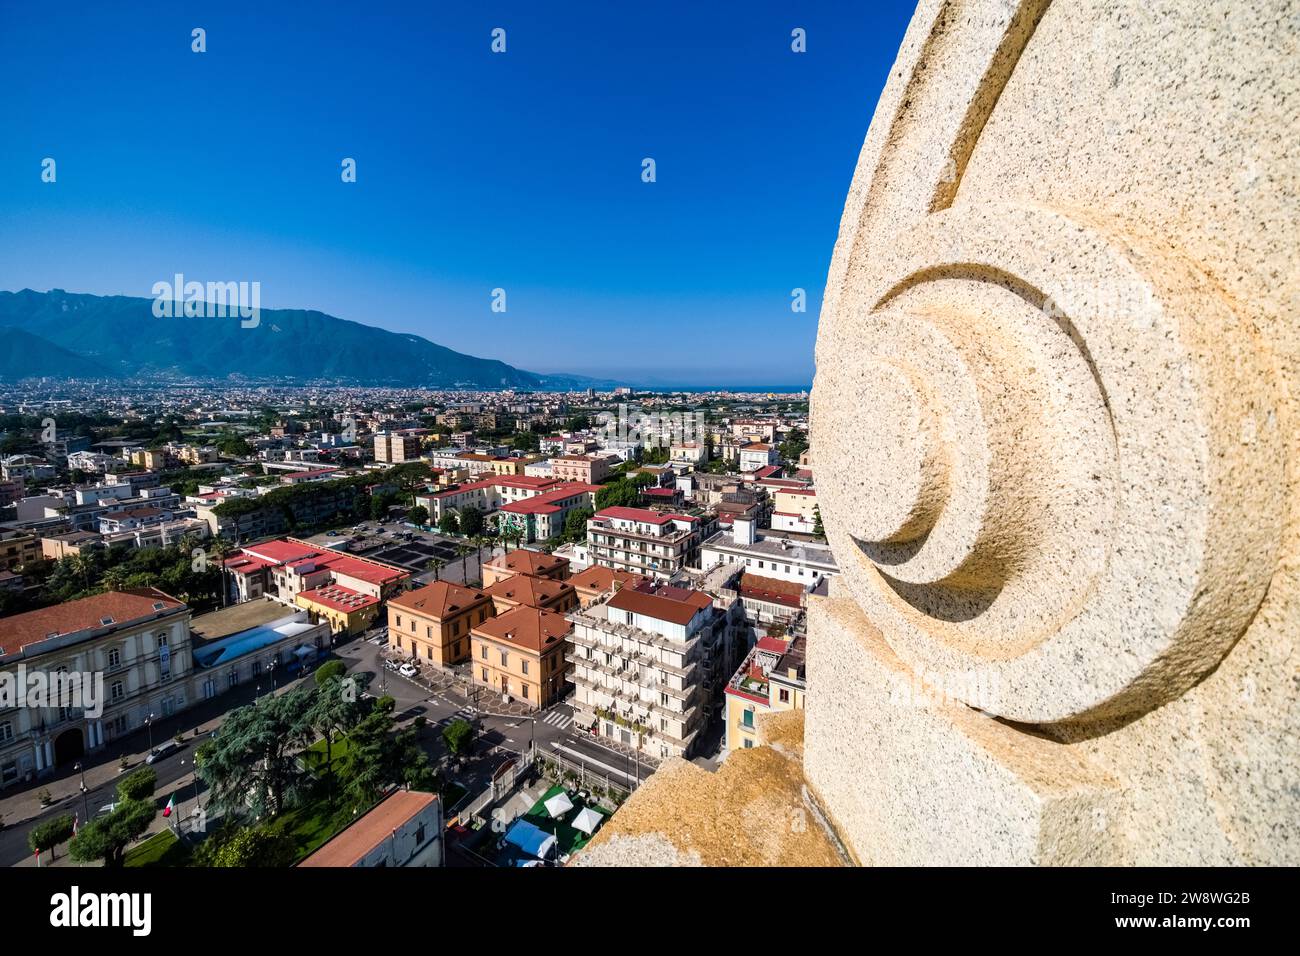 Aerial view of the buildings of the town Pompeii, seen from the bell tower of the church Santuario della Beata Vergine del Santo Rosario. Stock Photo